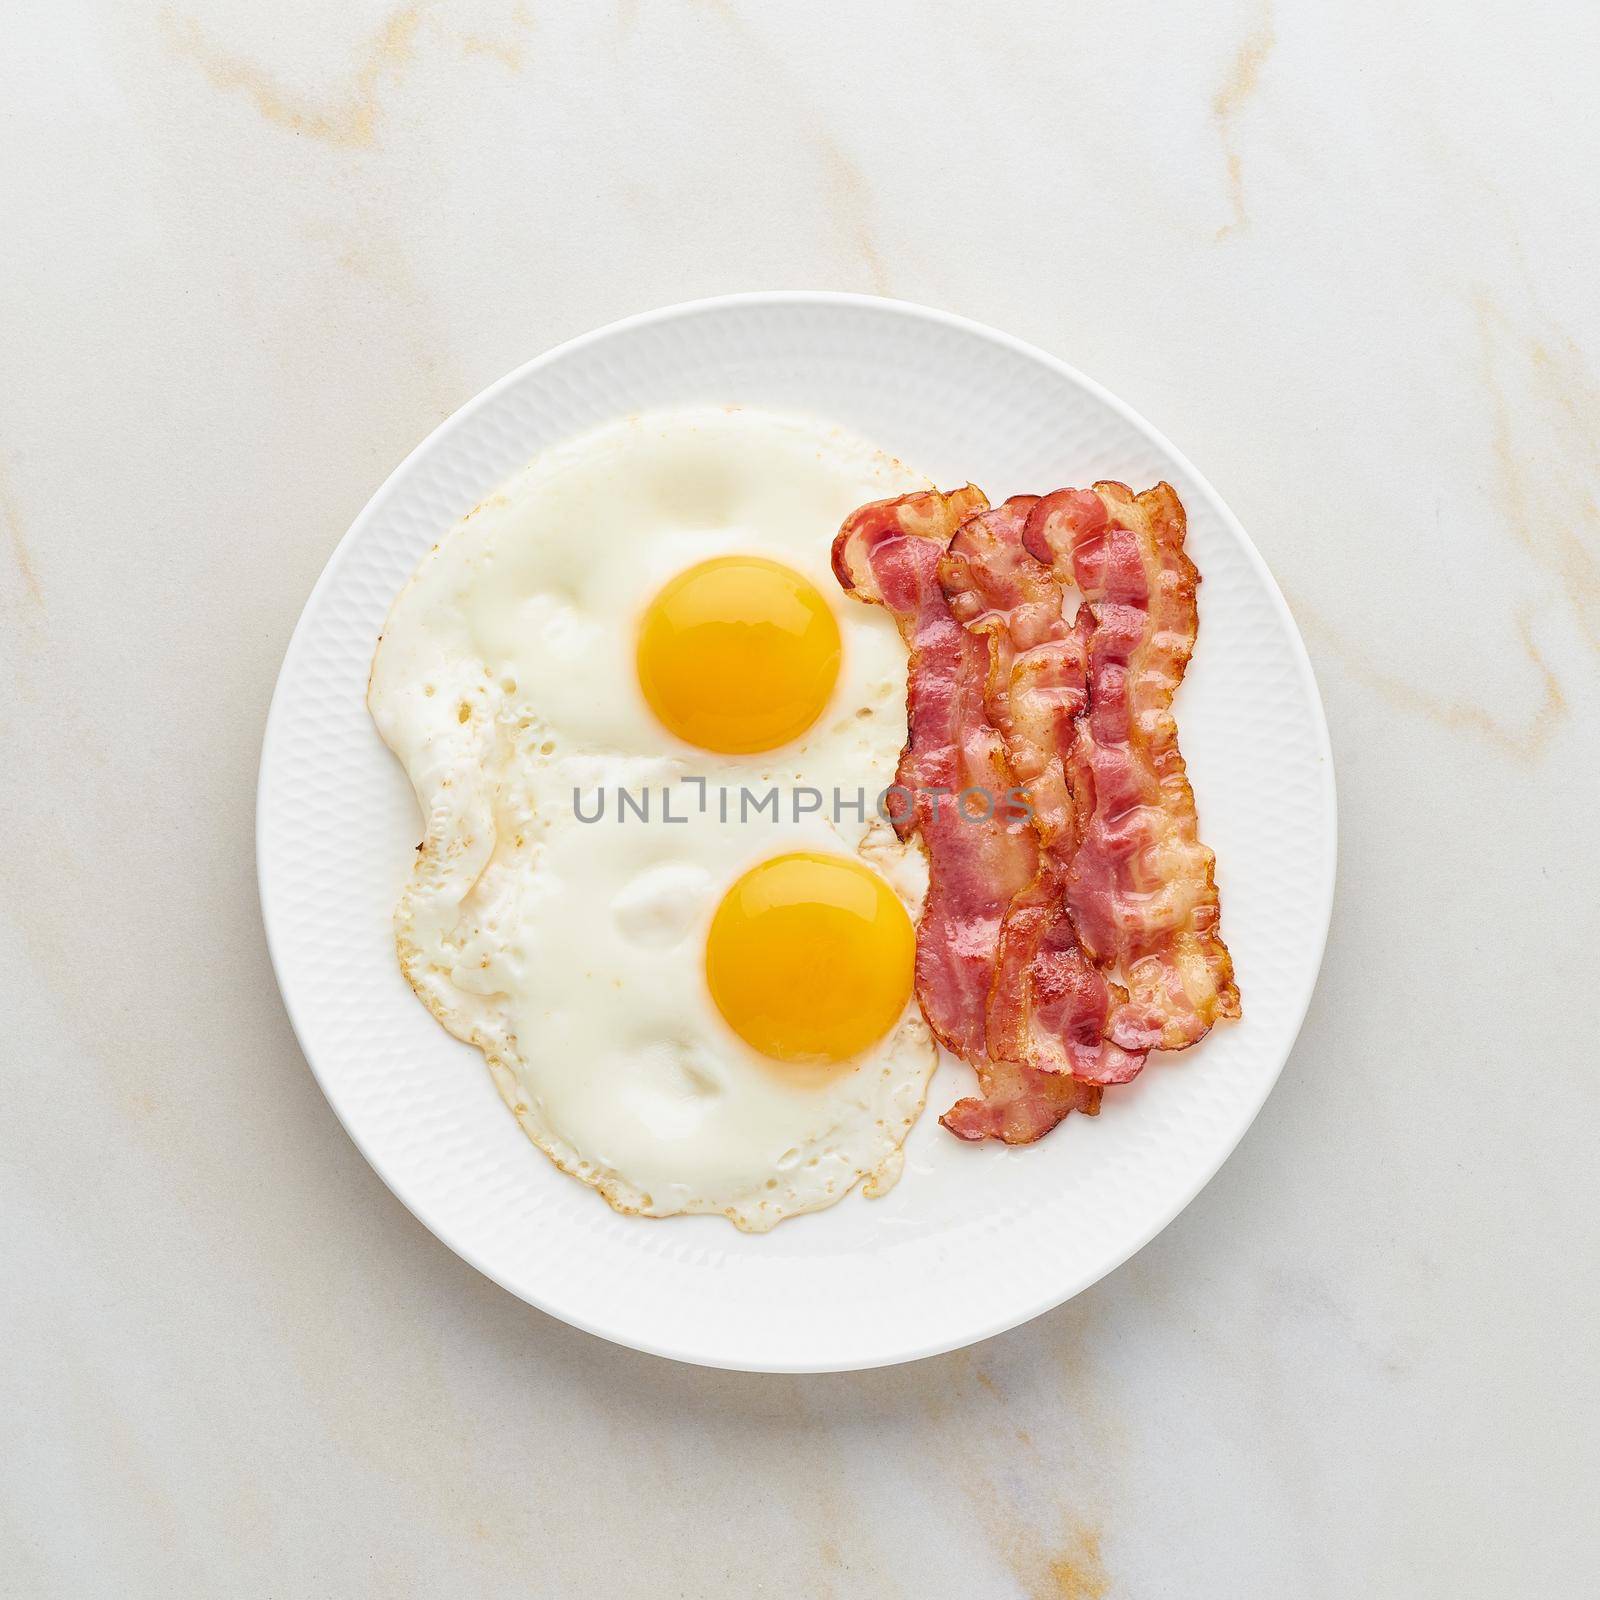 fried eggs with bacon, foodmap ketogenic keto diet, top view